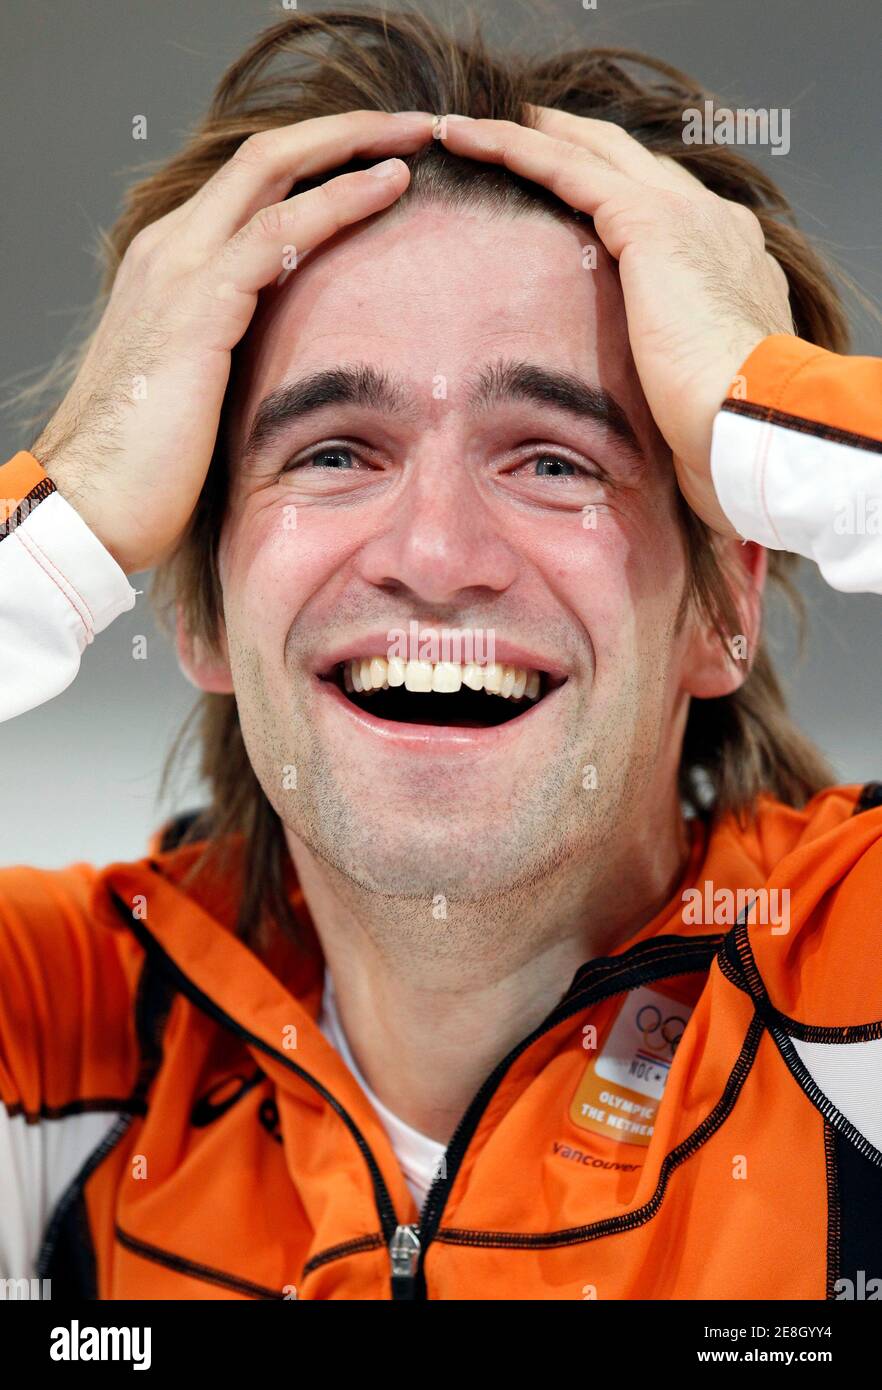 Mark Tuitert of the Netherlands reacts after winning the men's 1500 metres speed skating race at the Richmond Olympic Oval during the Vancouver 2010 Winter Olympics February 20, 2010.     REUTERS/Jerry Lampen (CANADA) Stock Photo